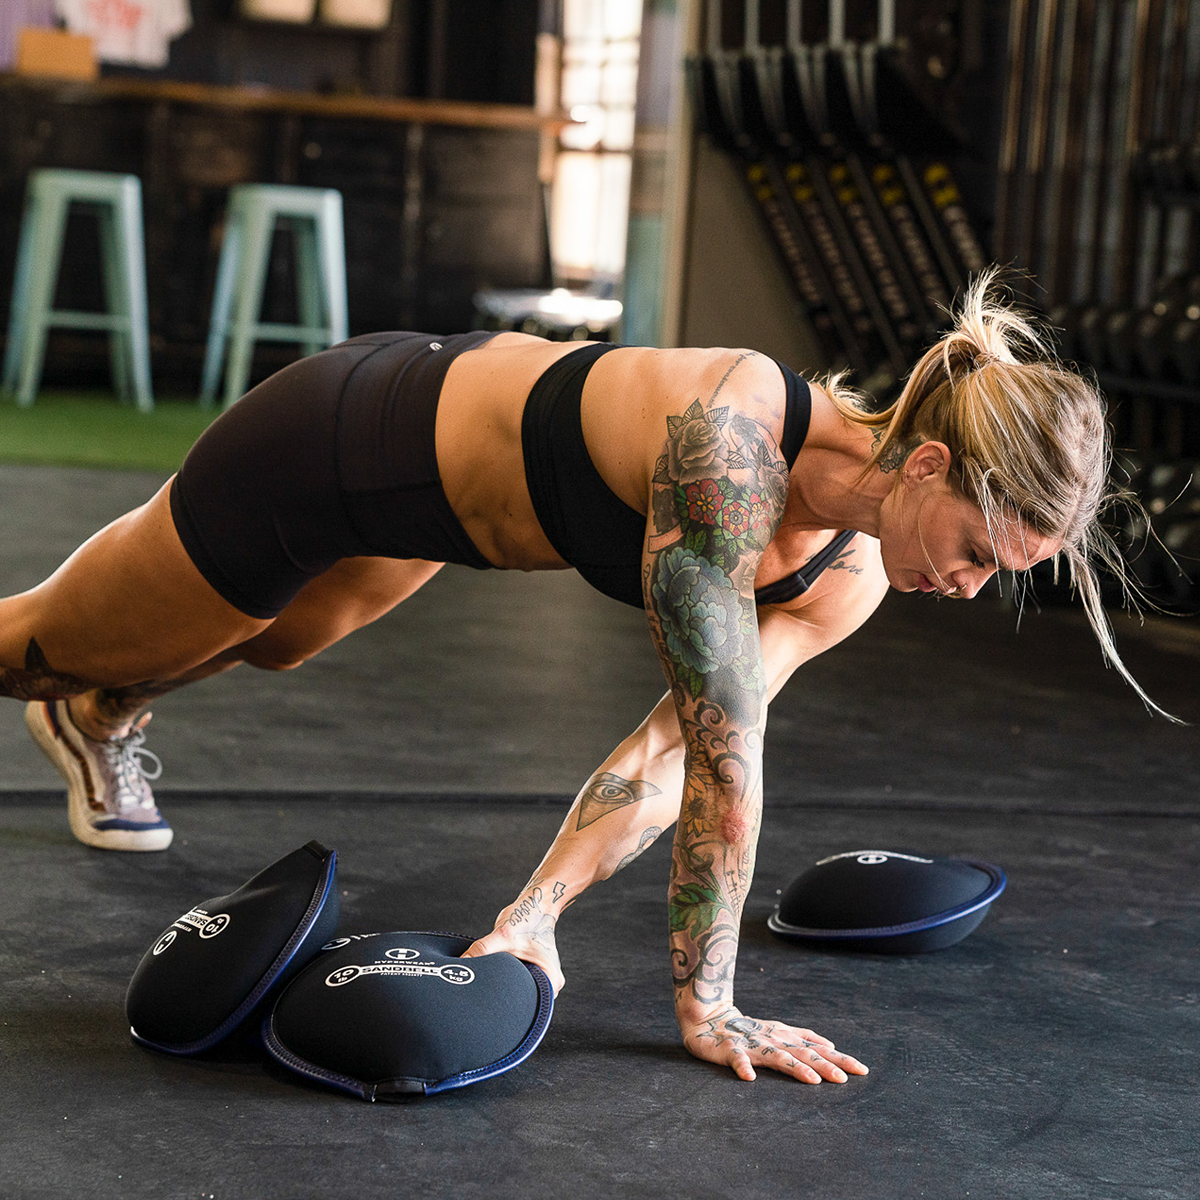 female in a gym setting at crossfit holding a sandbell free weight in prone plank position